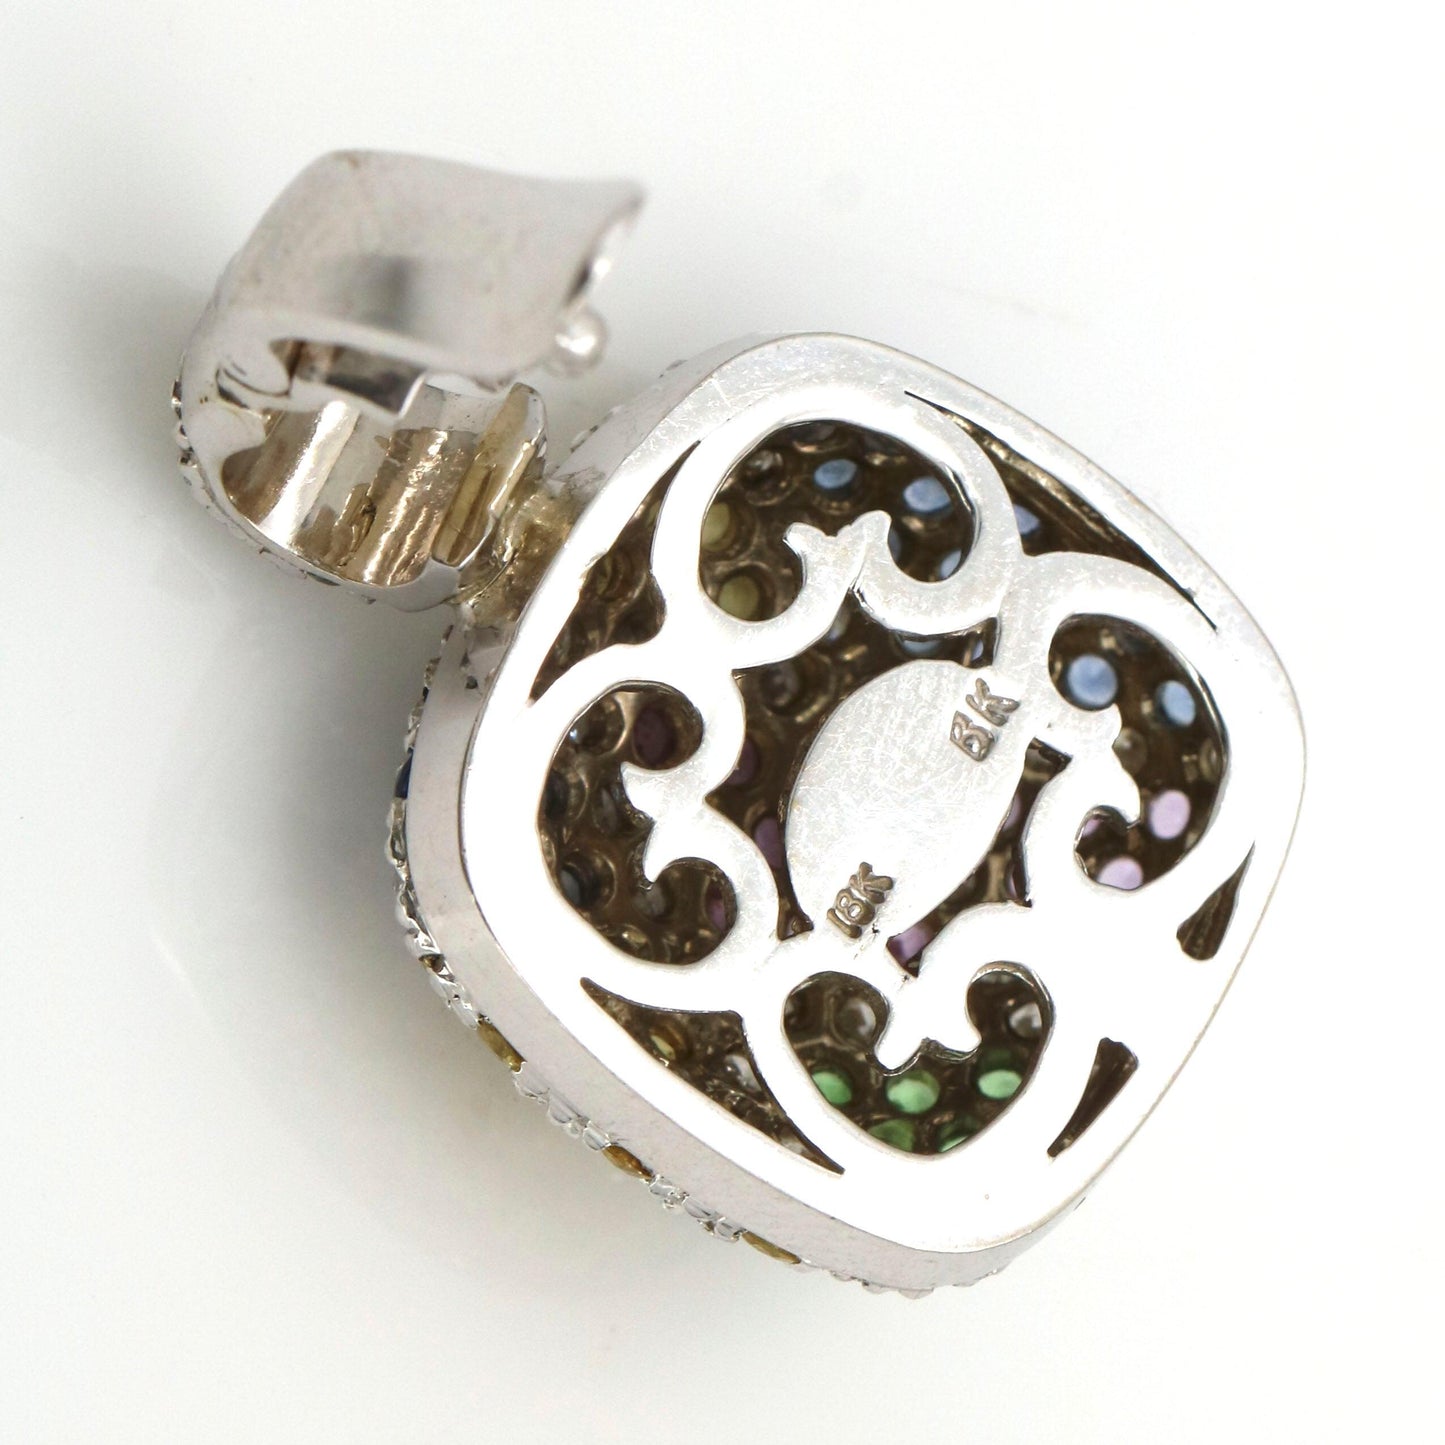 Women's Colorful Gemstone and Diamond Enhancer Pendant in 18k White Gold Signed - 31 Jewels Inc.